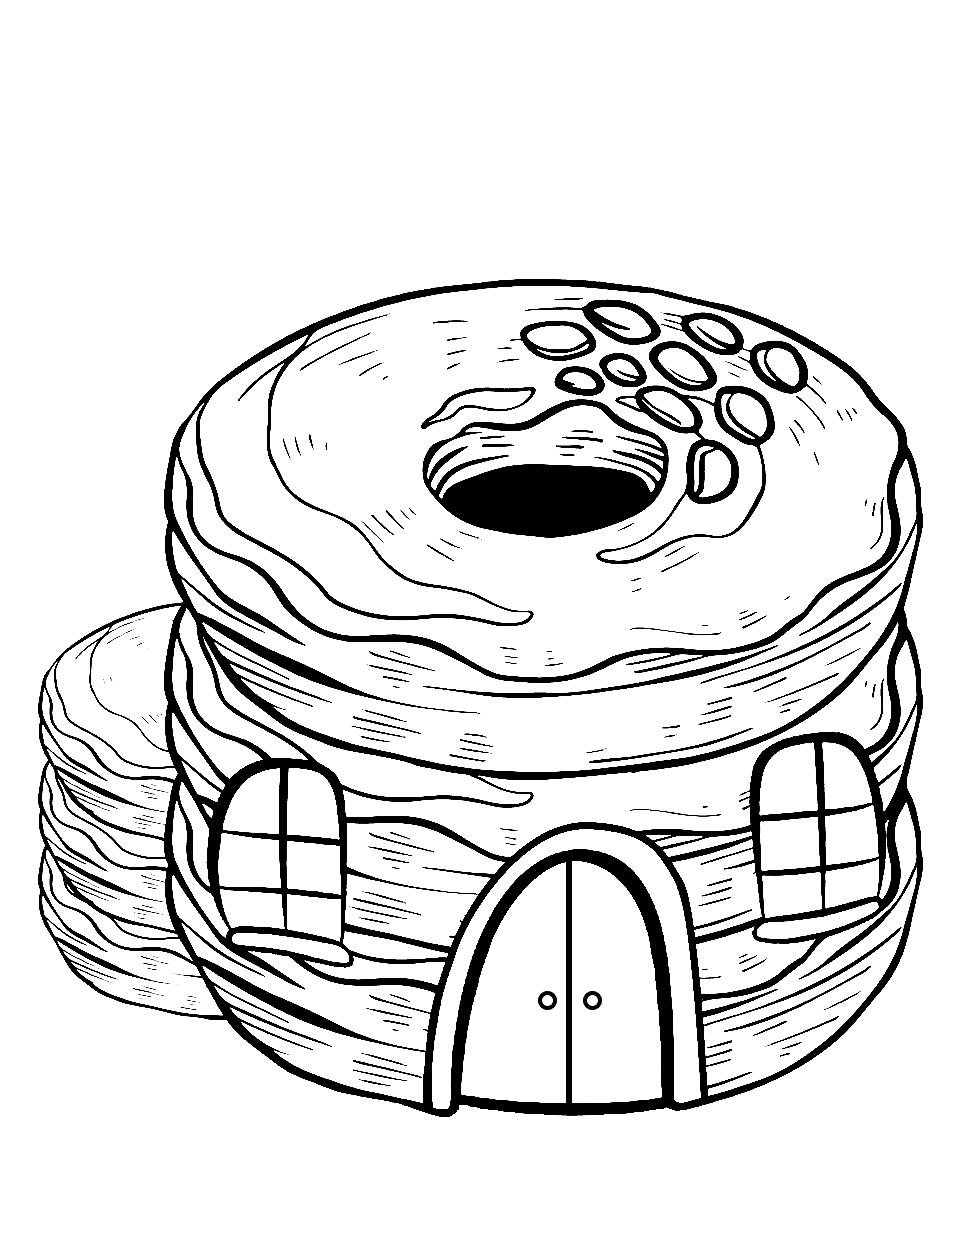 Doughnut House Donut Coloring Page - A house design that is shaped like doughnuts.